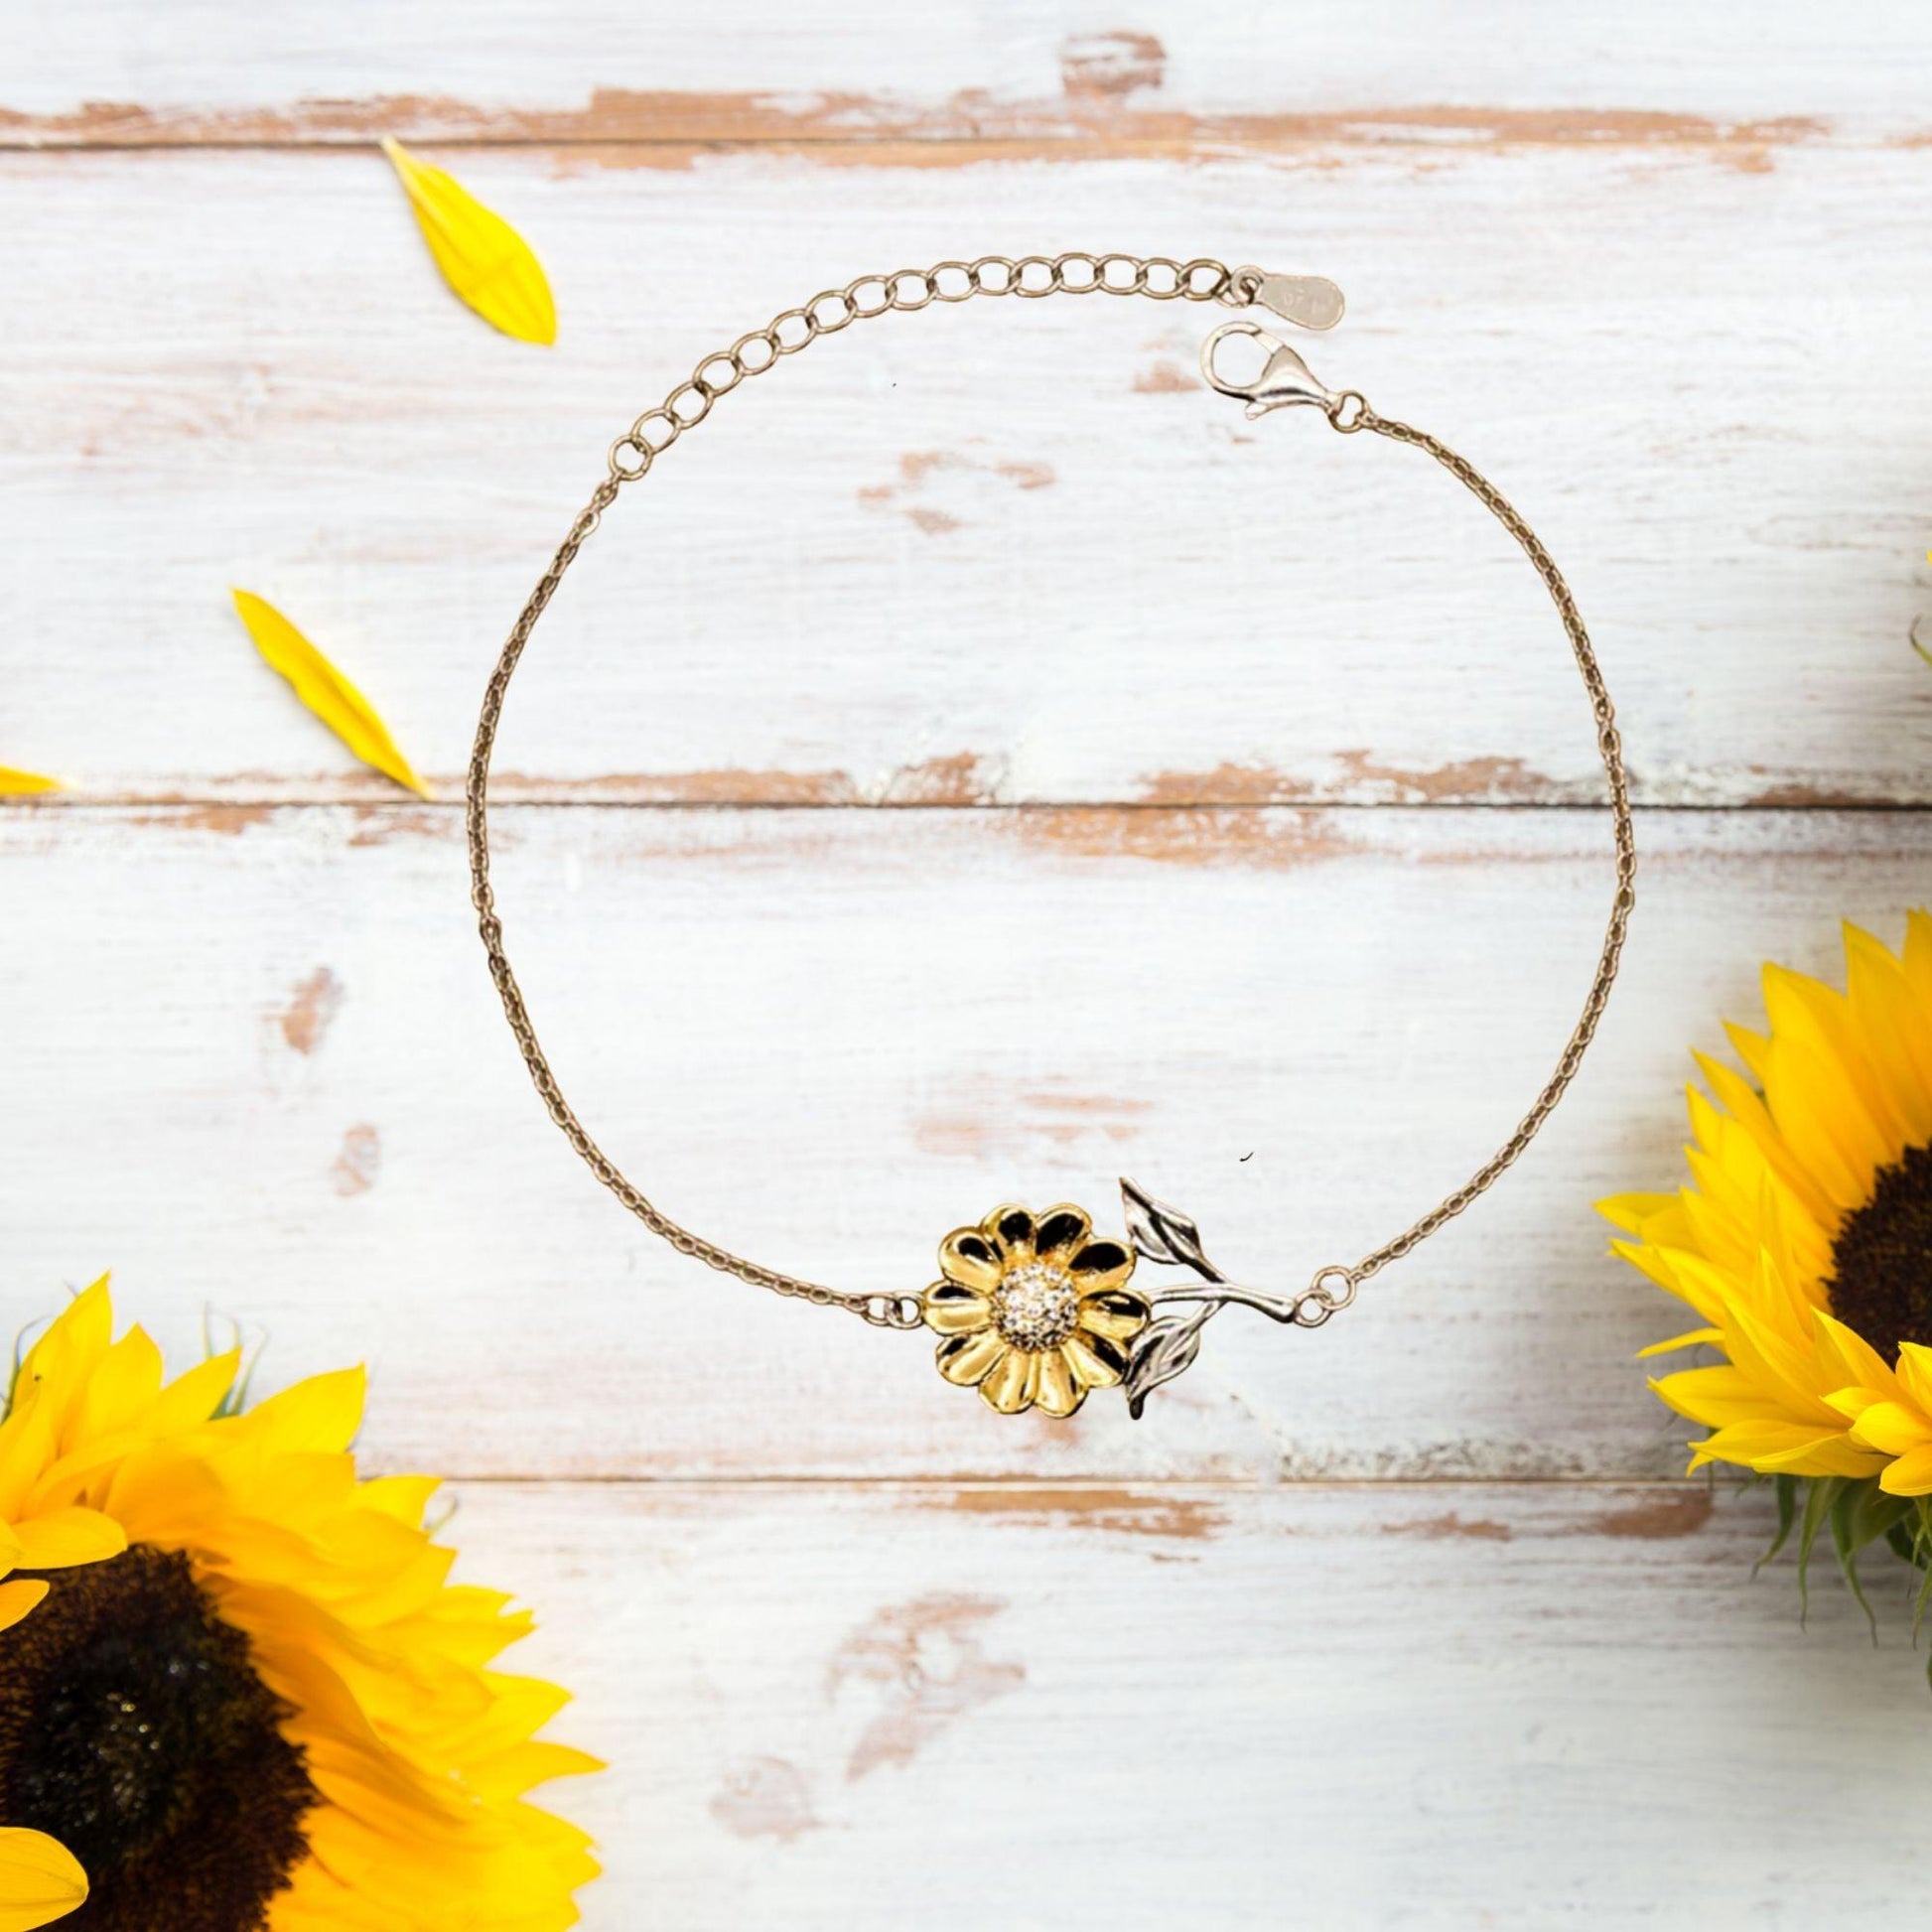 New Mexico is my home Gifts, Lovely New Mexico Birthday Christmas Sunflower Bracelet For People from New Mexico, Men, Women, Friends - Mallard Moon Gift Shop